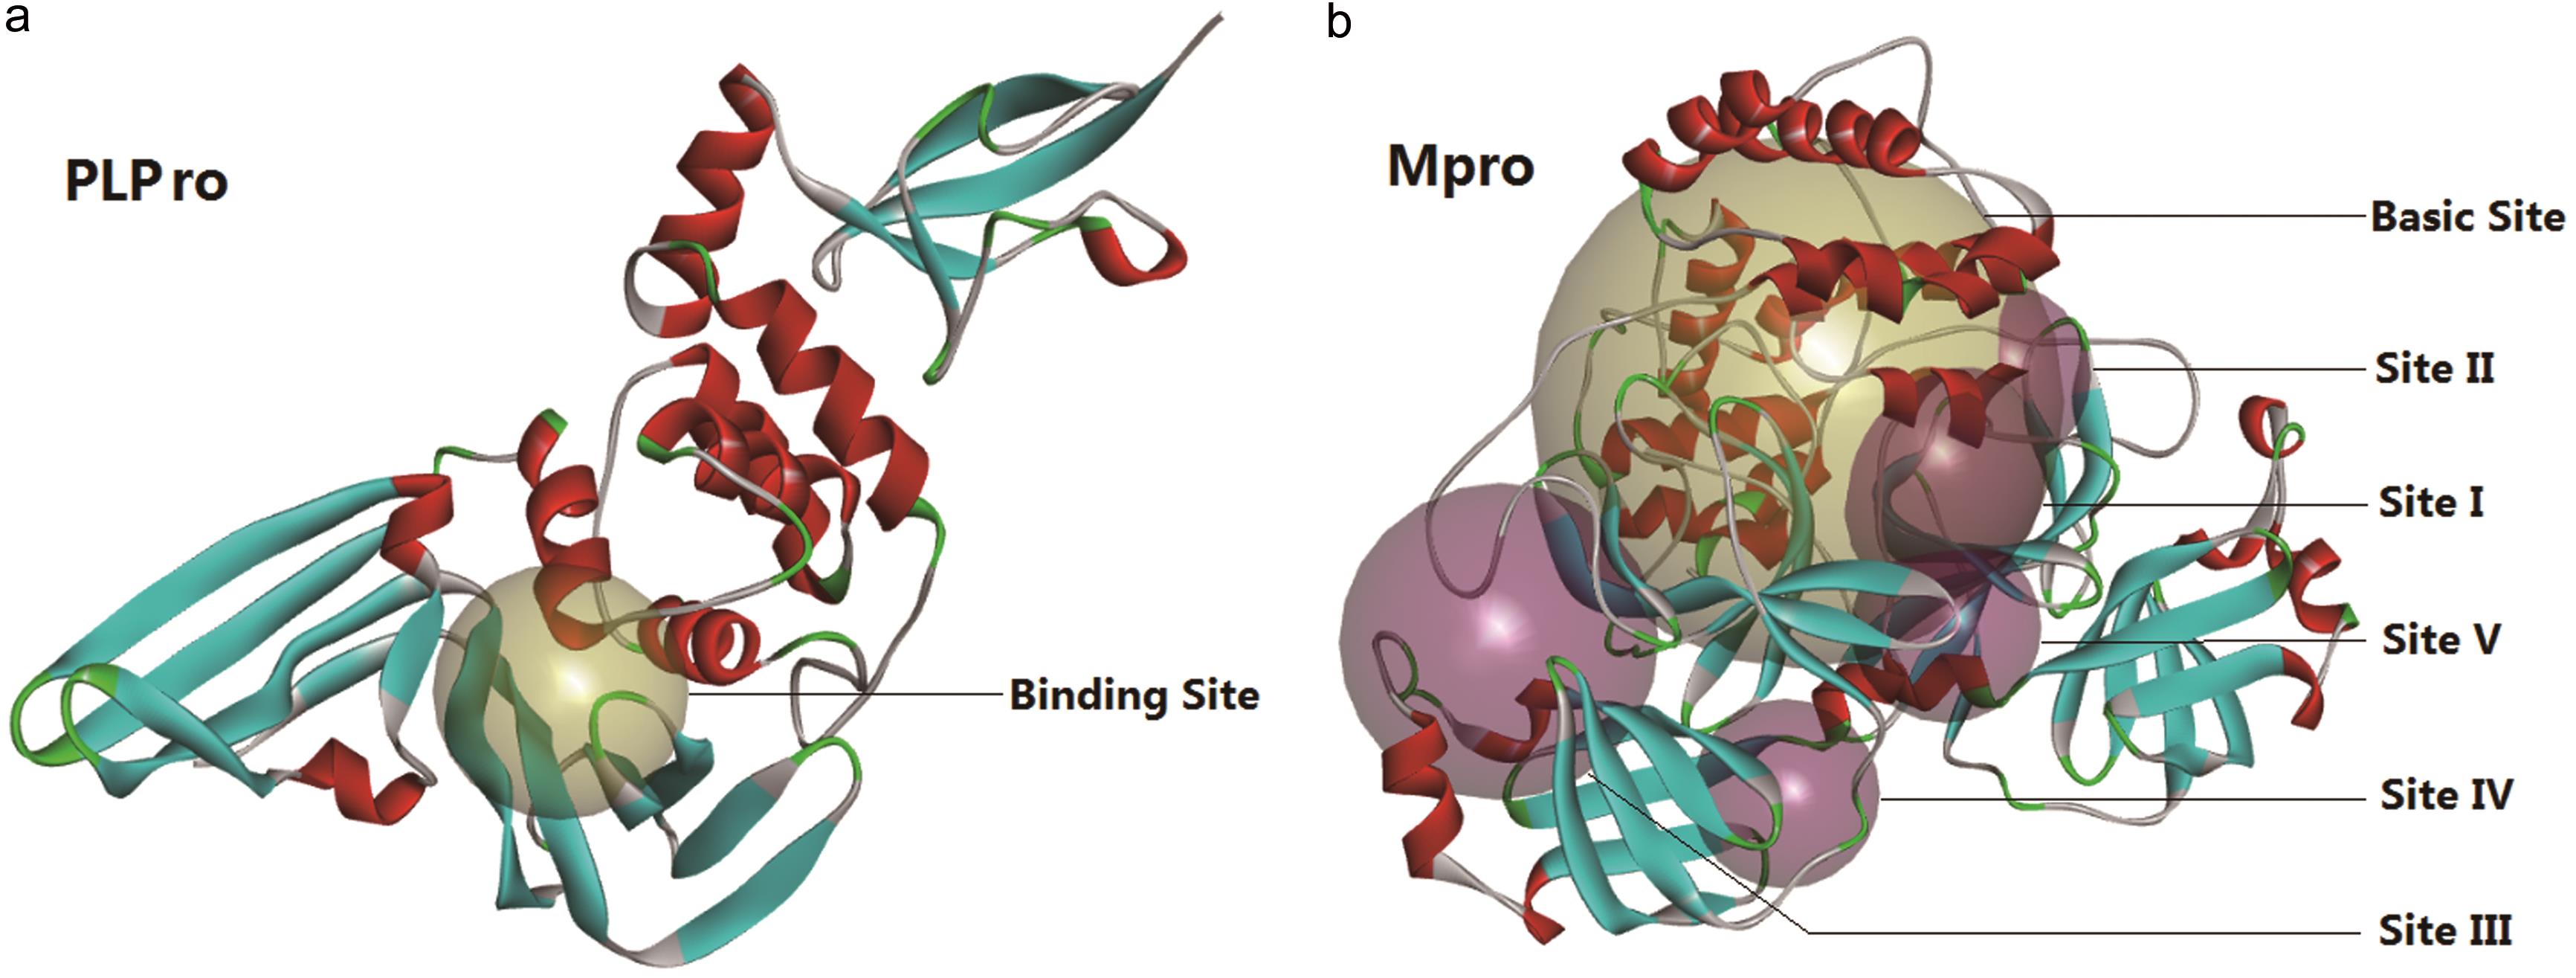 The defined binding sites in SARS-CoV-2 PLPro (a) and Mpro (b).